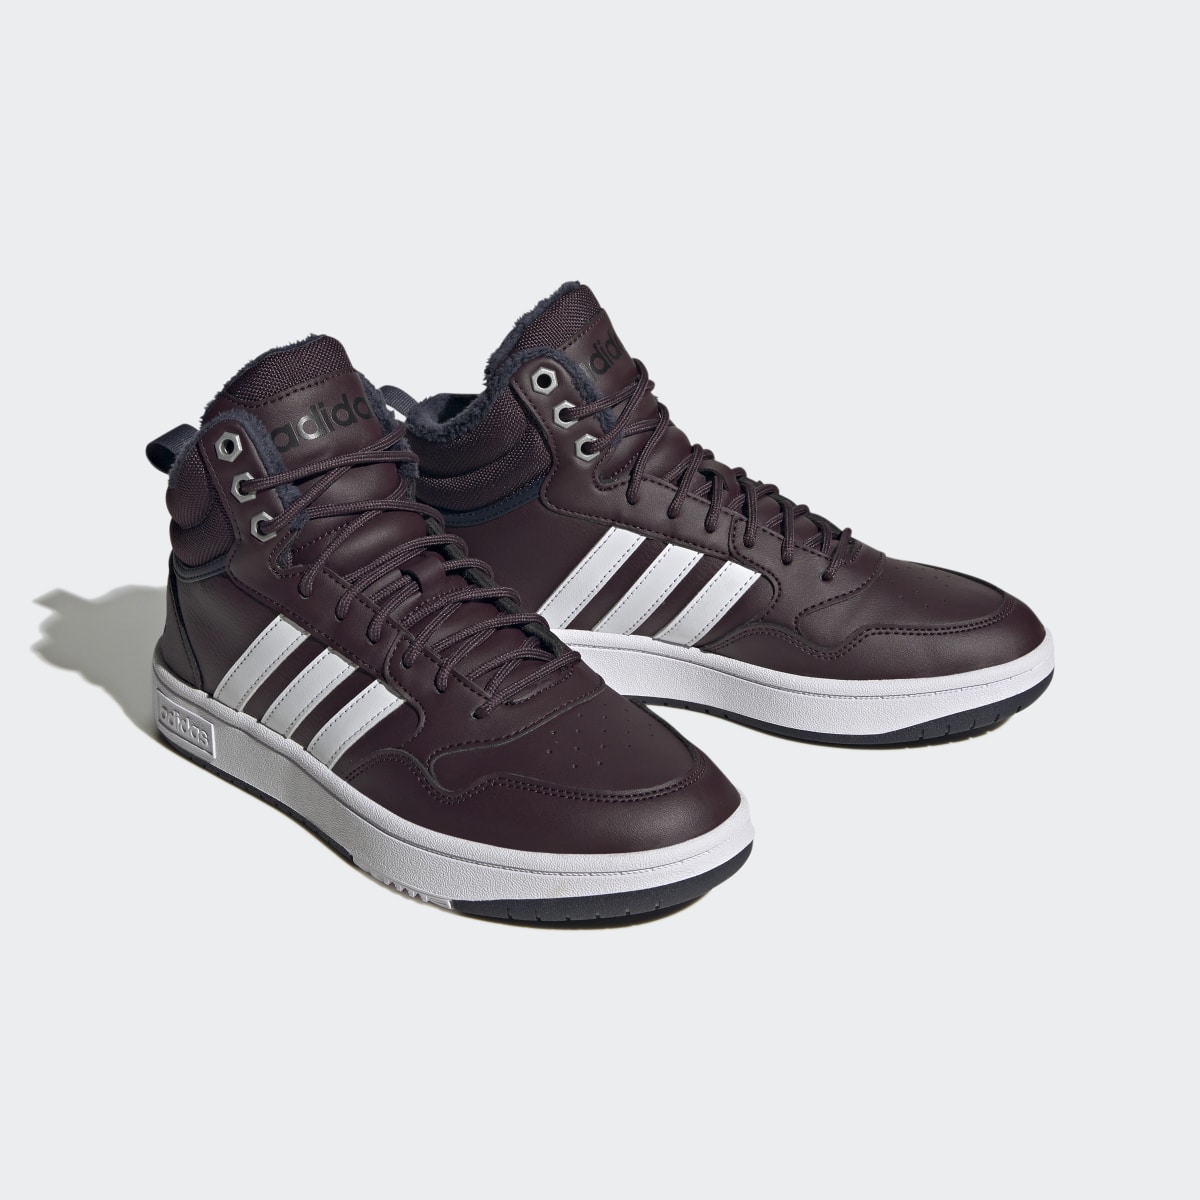 Adidas Hoops 3.0 Mid Lifestyle Basketball Classic Fur Lining Winterized Shoes. 8